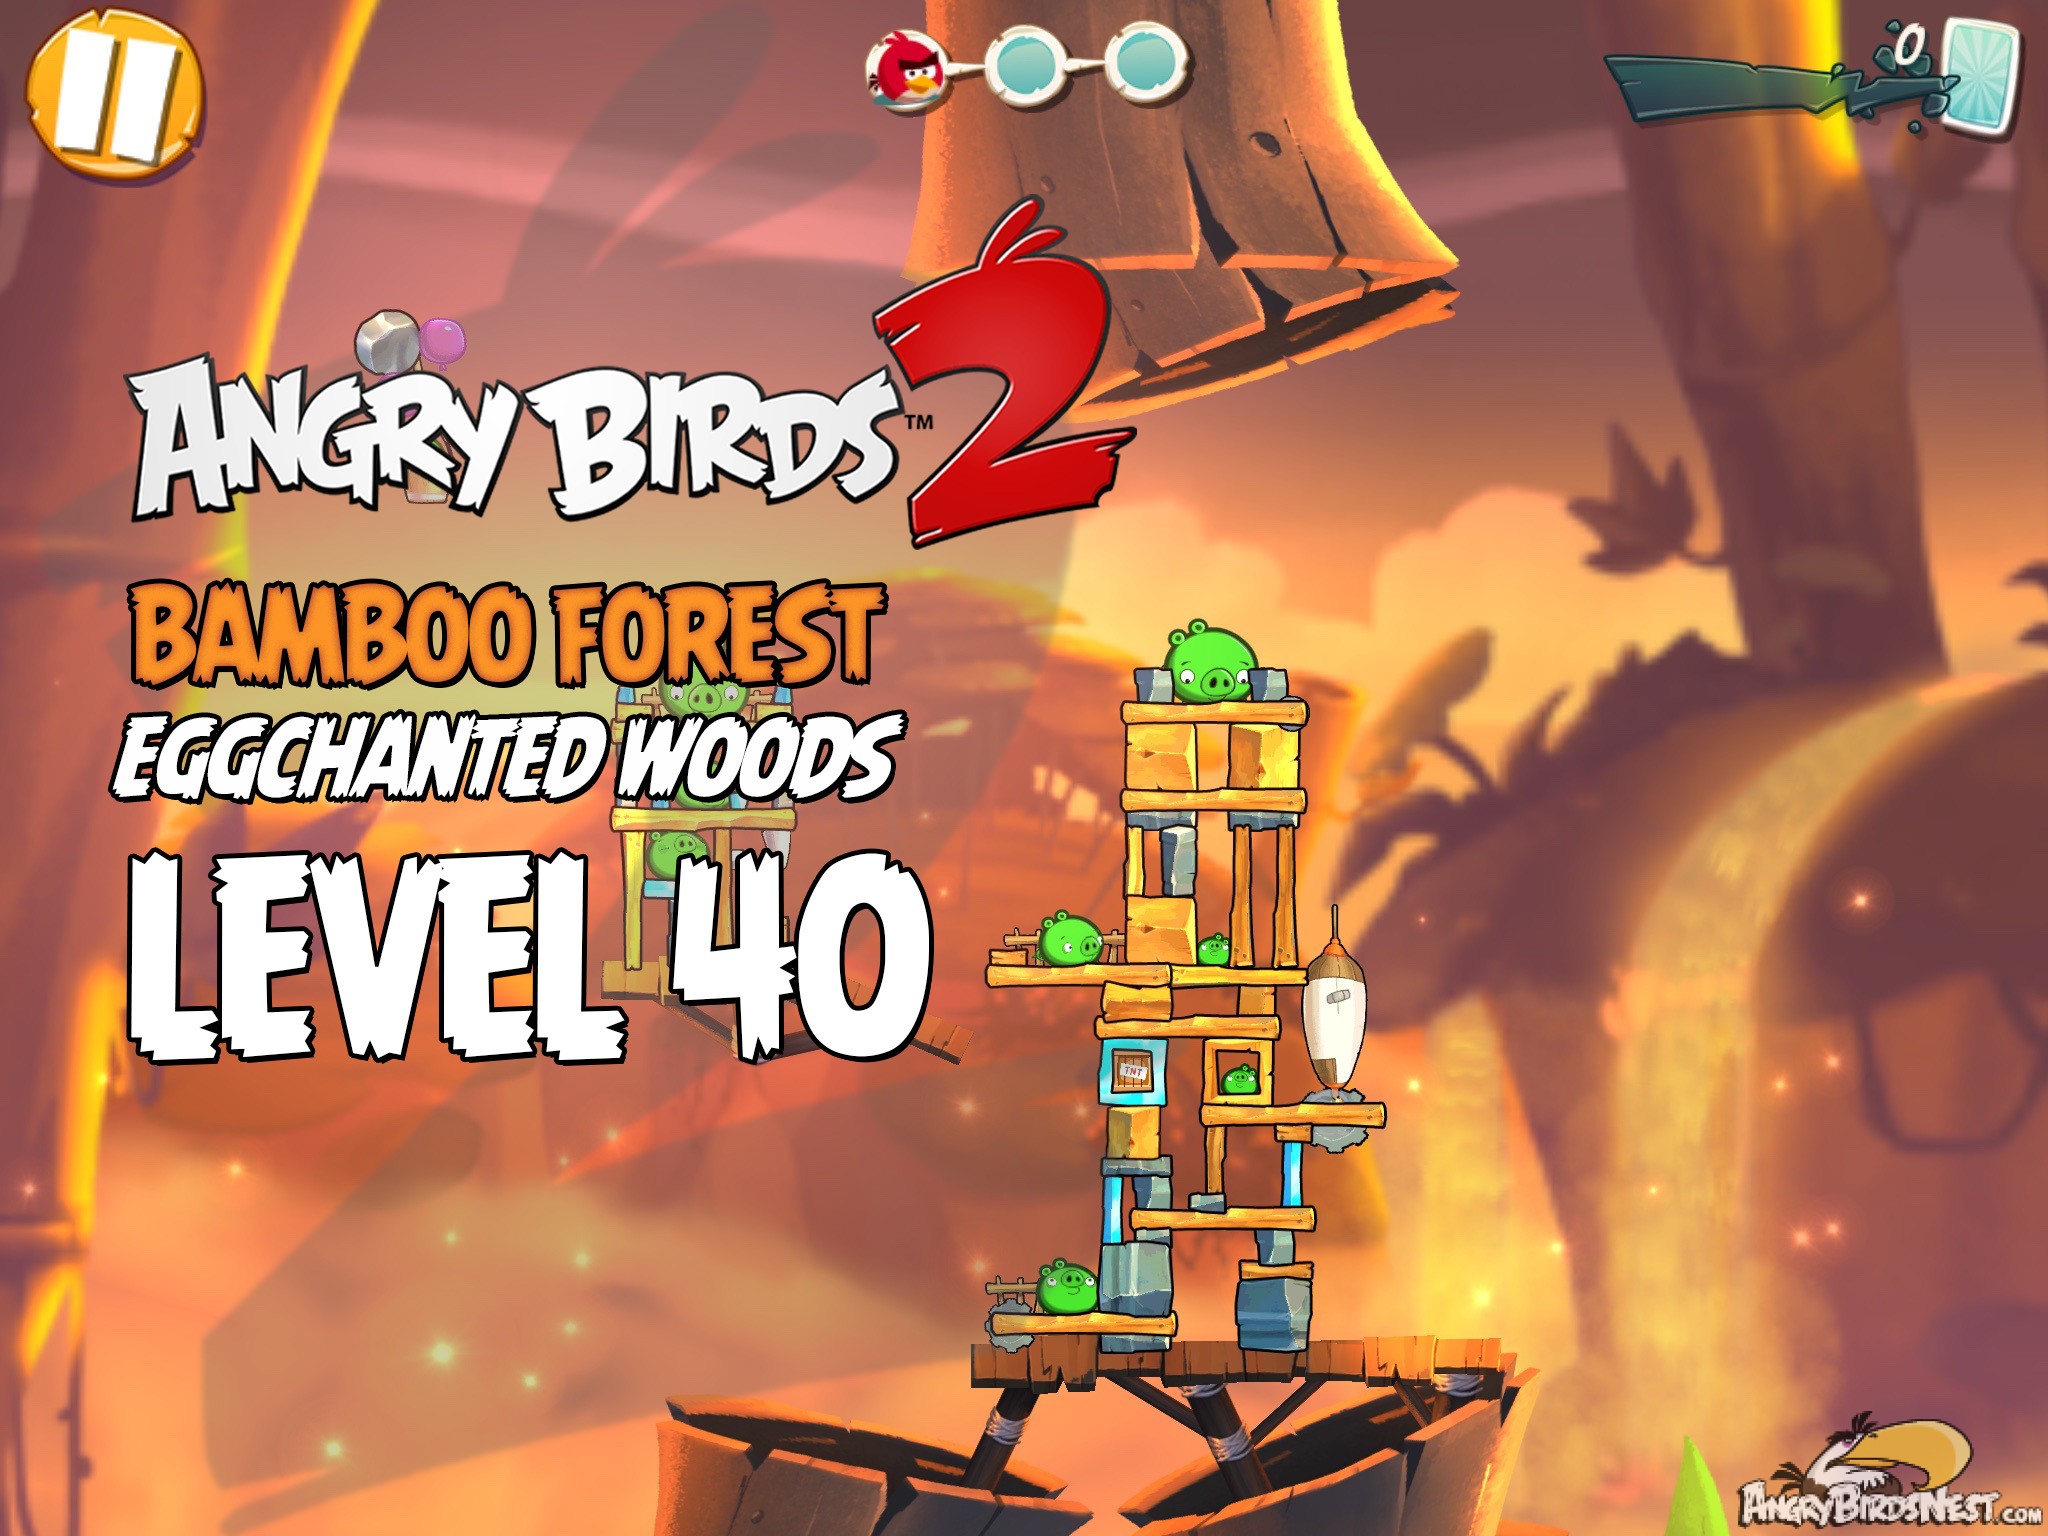 Angry Birds 2 Bamboo Forest Eggchanted Woods Level 40